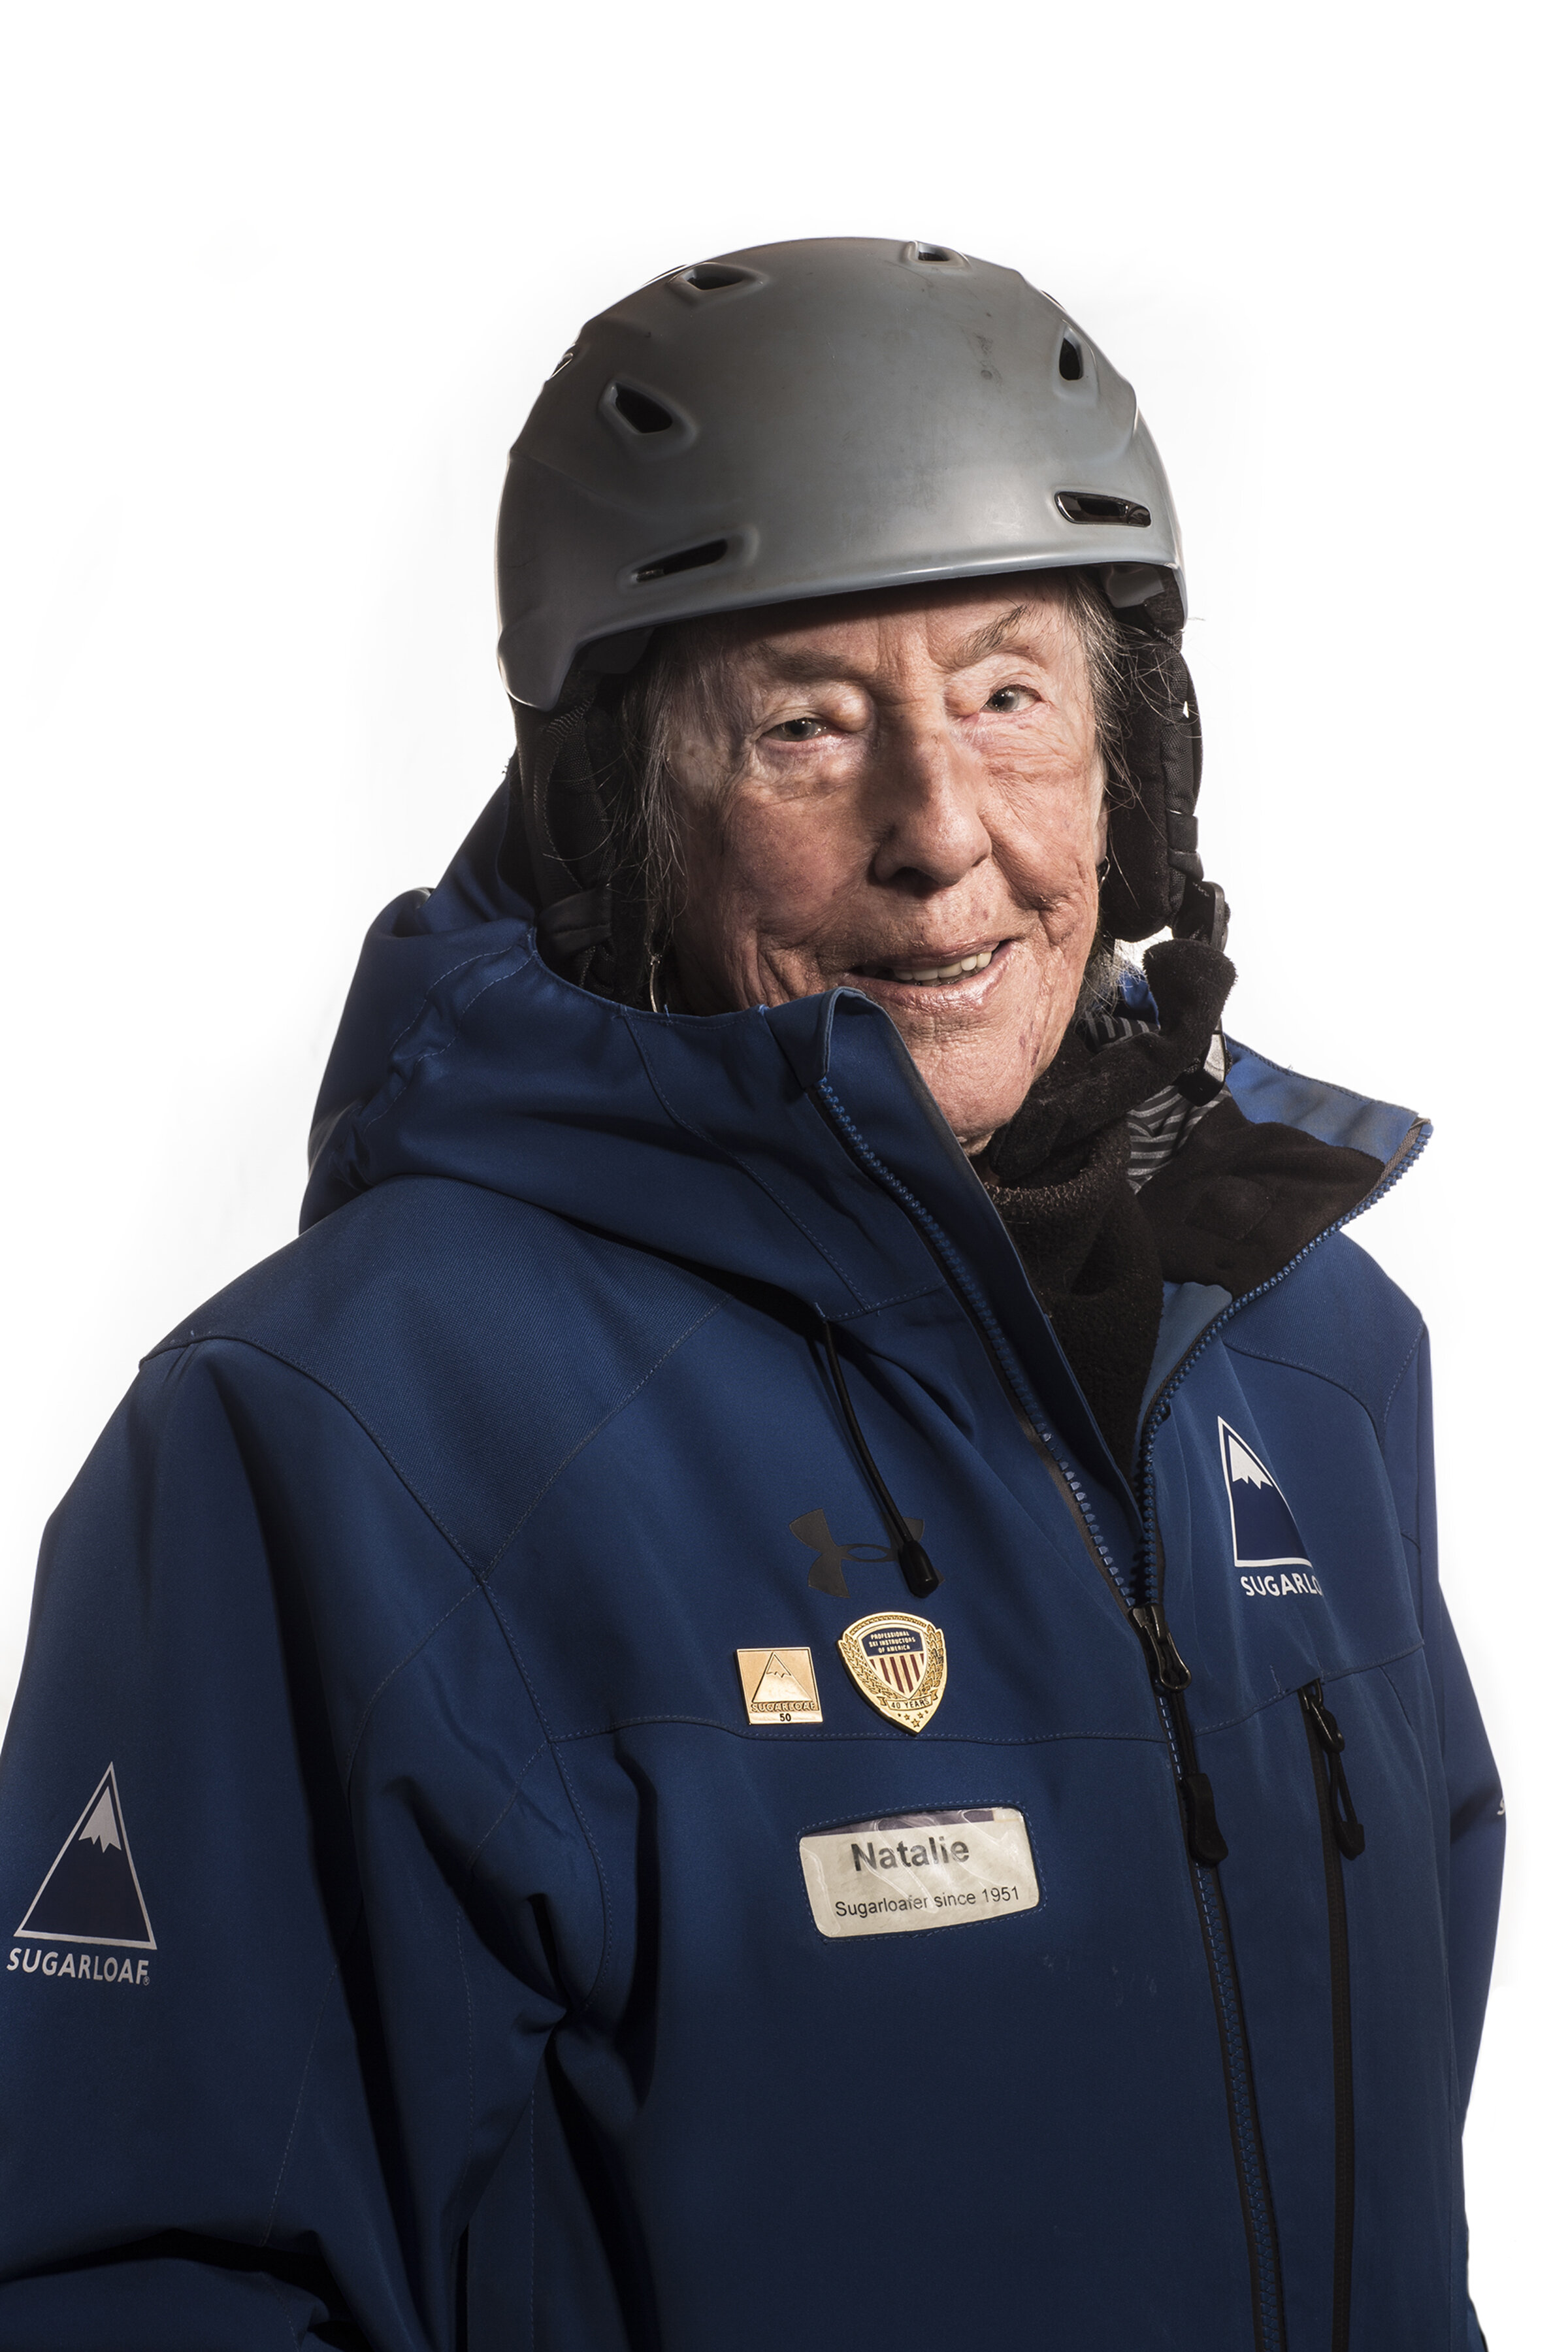  Natalie Terry, 95, of Waterville is gearing up for her 51st consecutive year of teaching skiing lessons at Sugarloaf Ski Resort, starting her career in 1970. Last year the resort had to create a commemorative pin she wears with pride for her 50th se